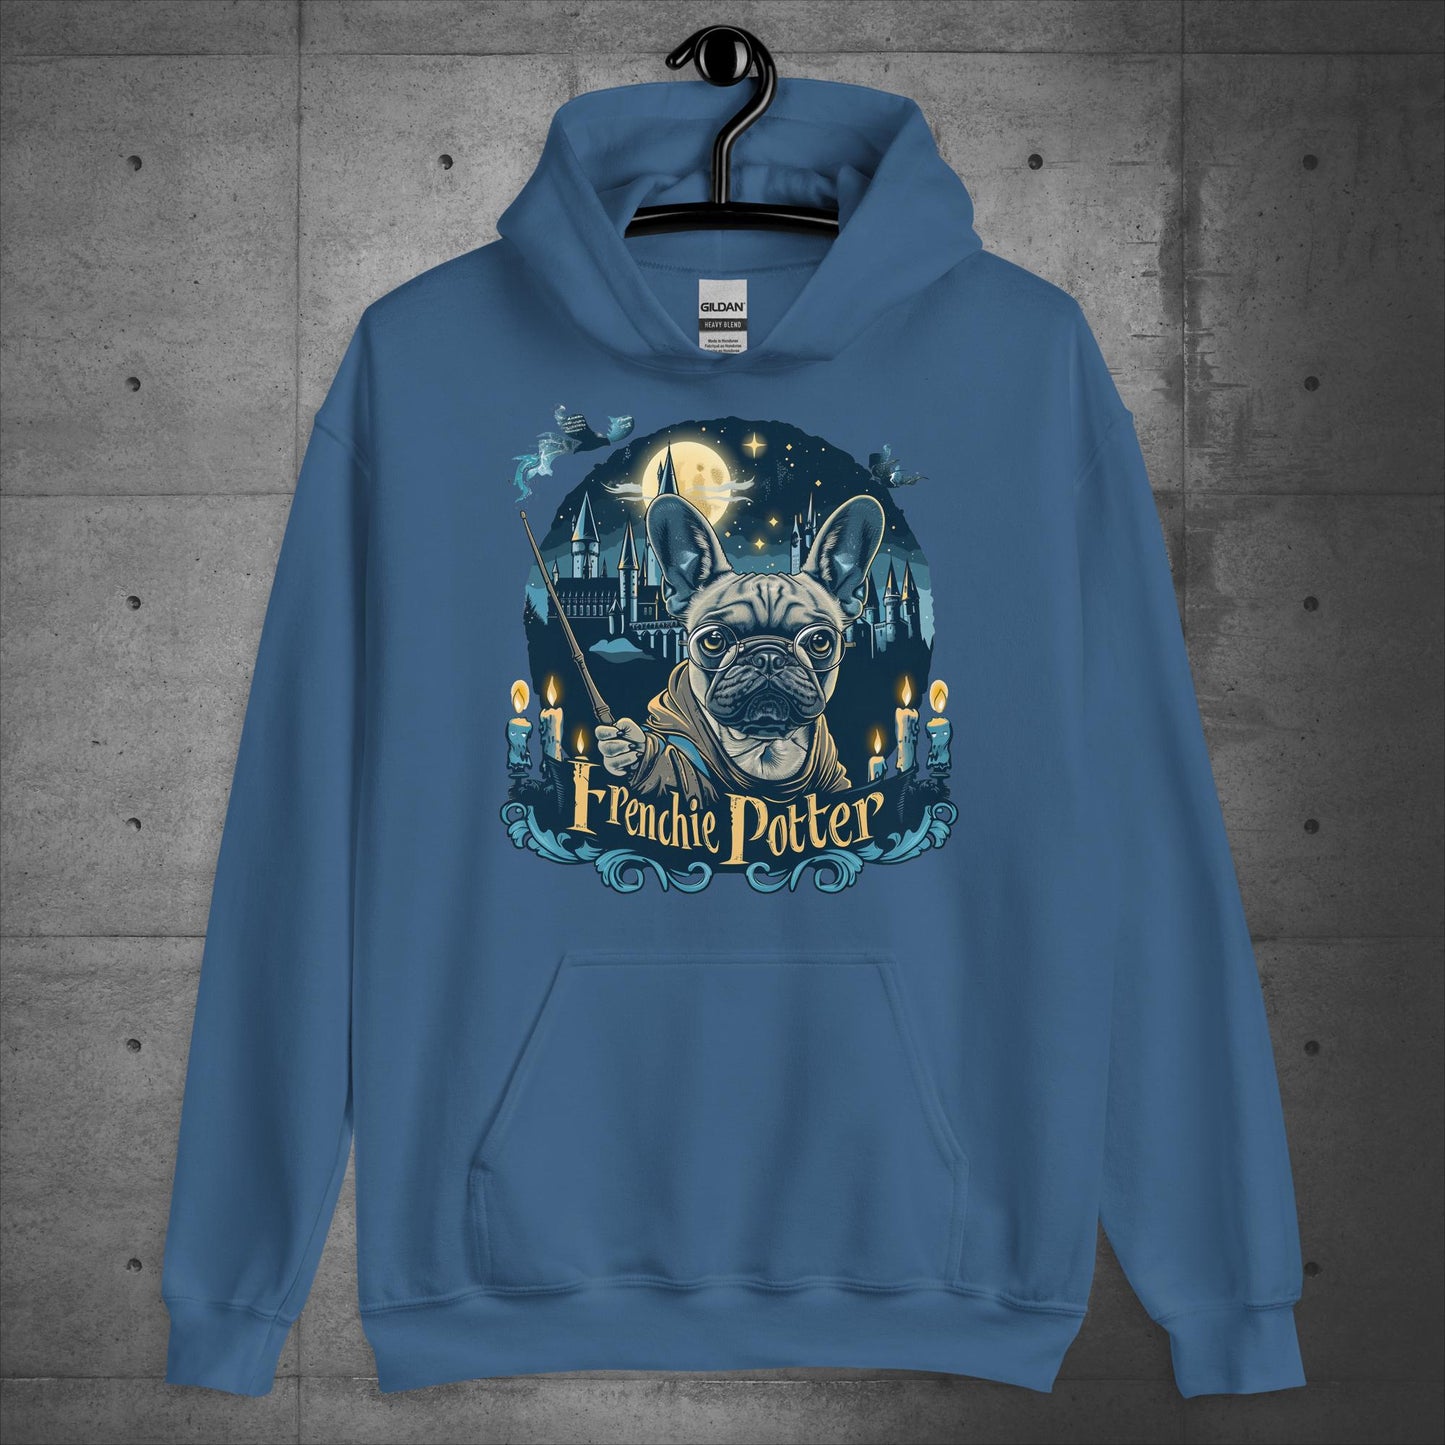 Unisex "Frenchie Potter" Hoodie